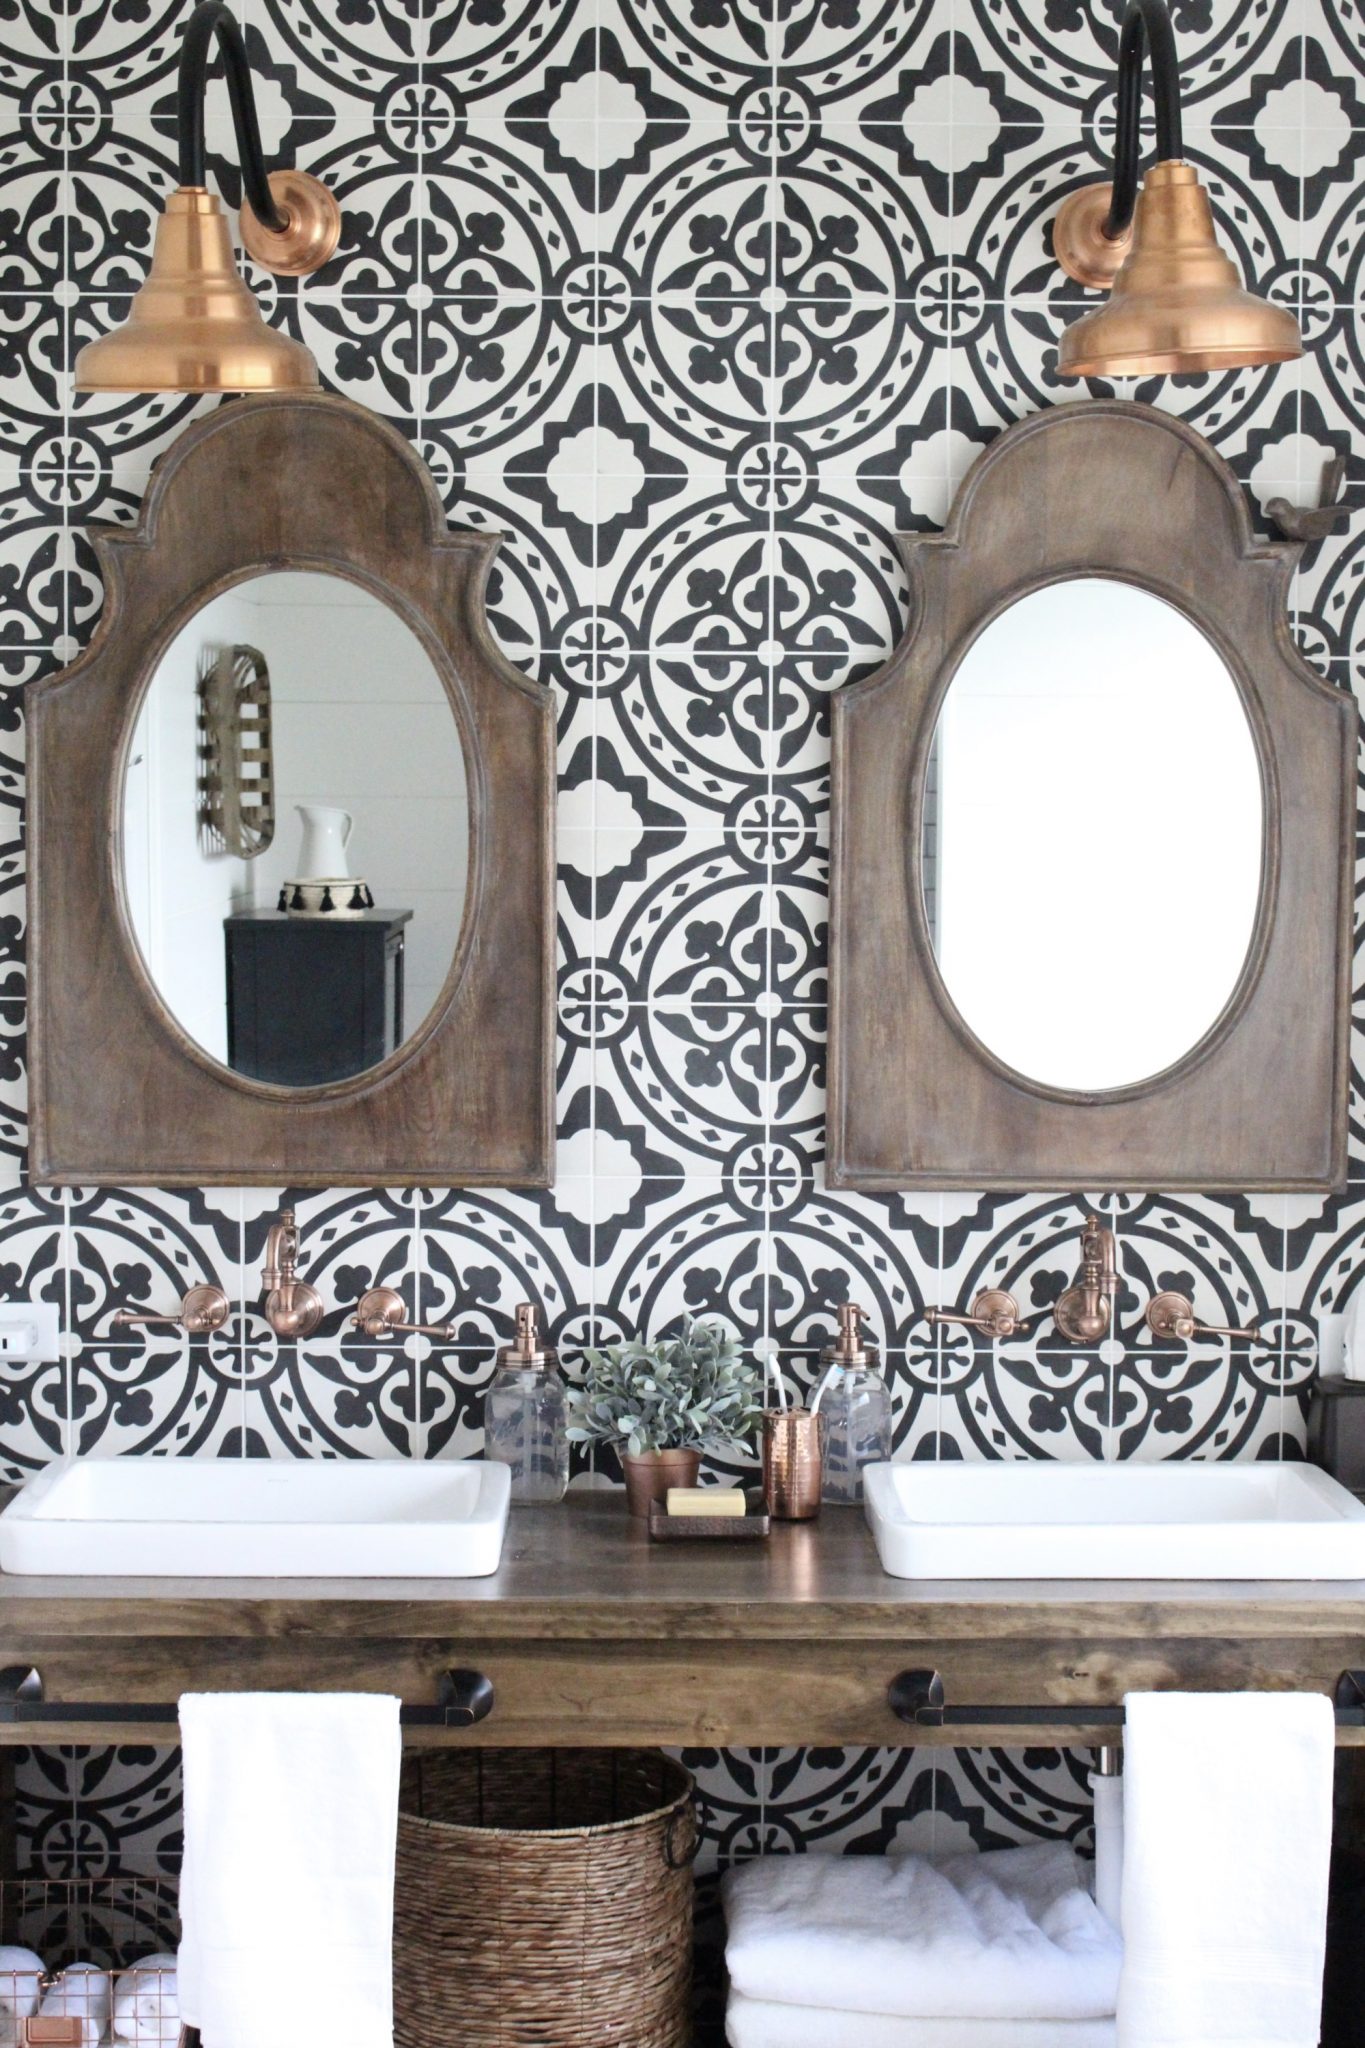 Adding patterned tile to your bathroom completely changes the style